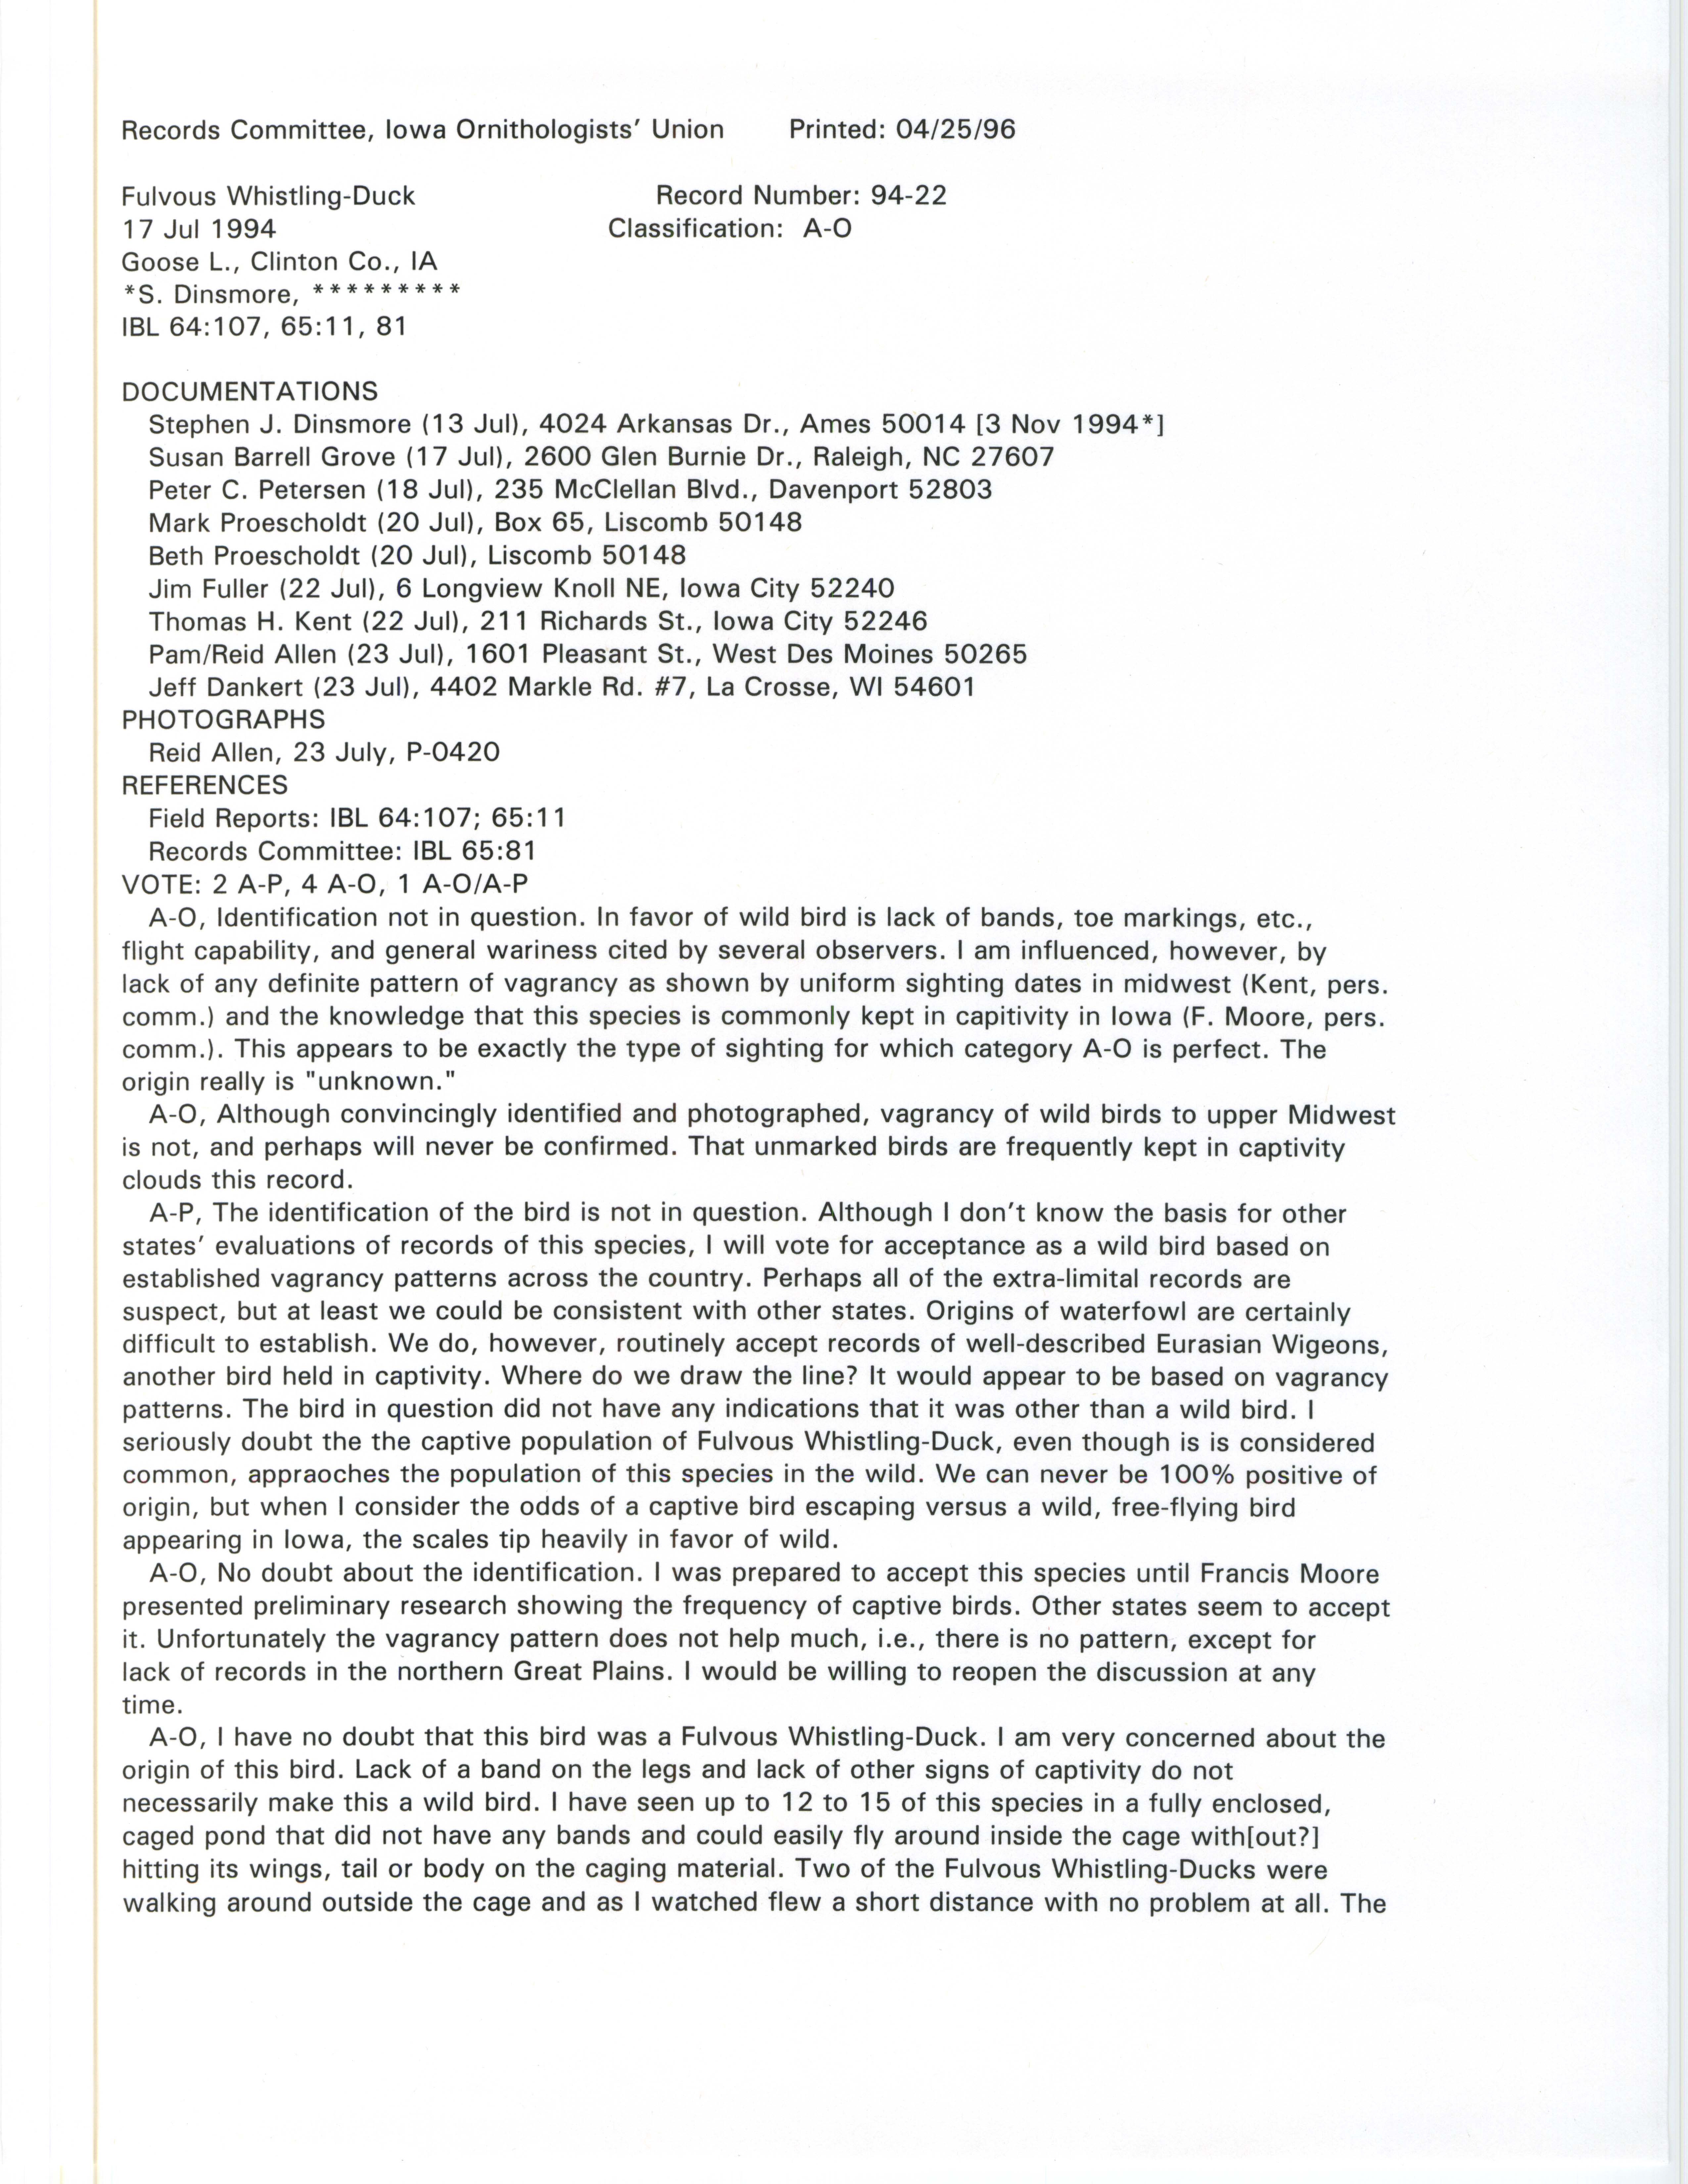 Records Committee review for rare bird sighting of Fulvous Whistling-Duck at Goose Lake, 1994